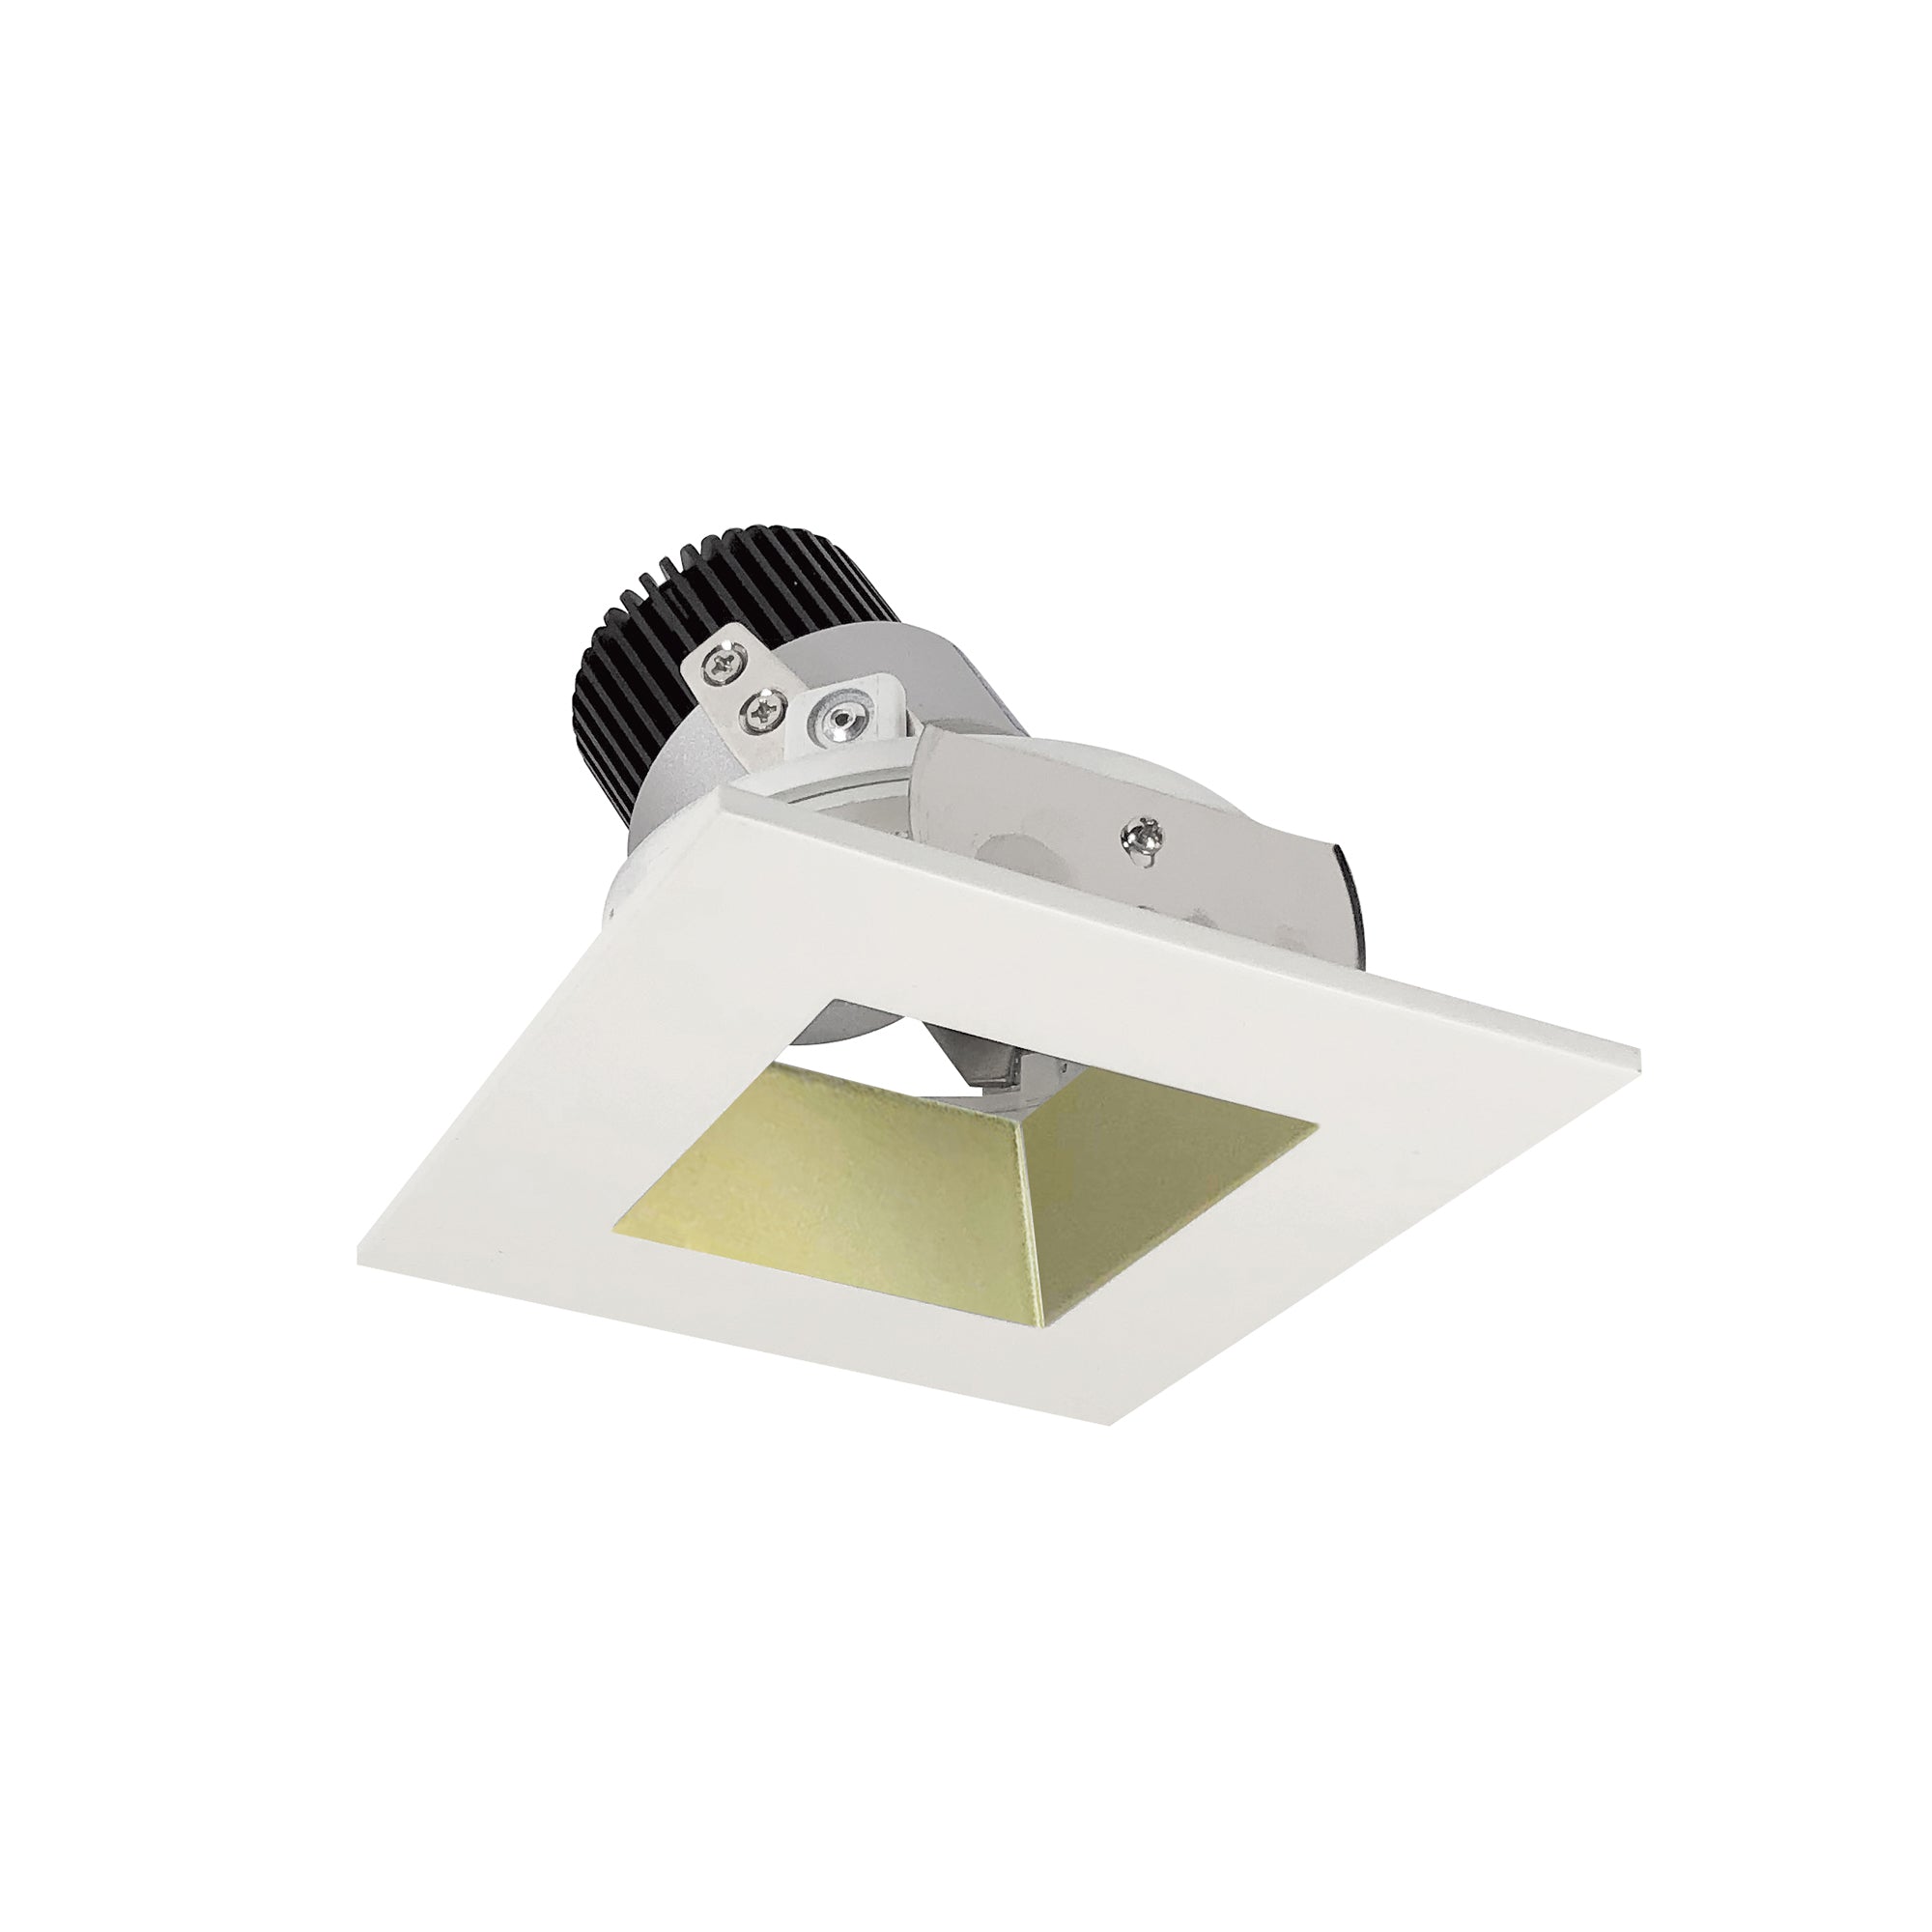 Nora Lighting NIO-4SDSQ35QCHMPW 4" Iolite LED Square Adjustable Reflector With Square Aperture, 10-Degree Optic, 800lm / 12W, 3500K - Champagne Haze Reflector / Matte Powder White Flange